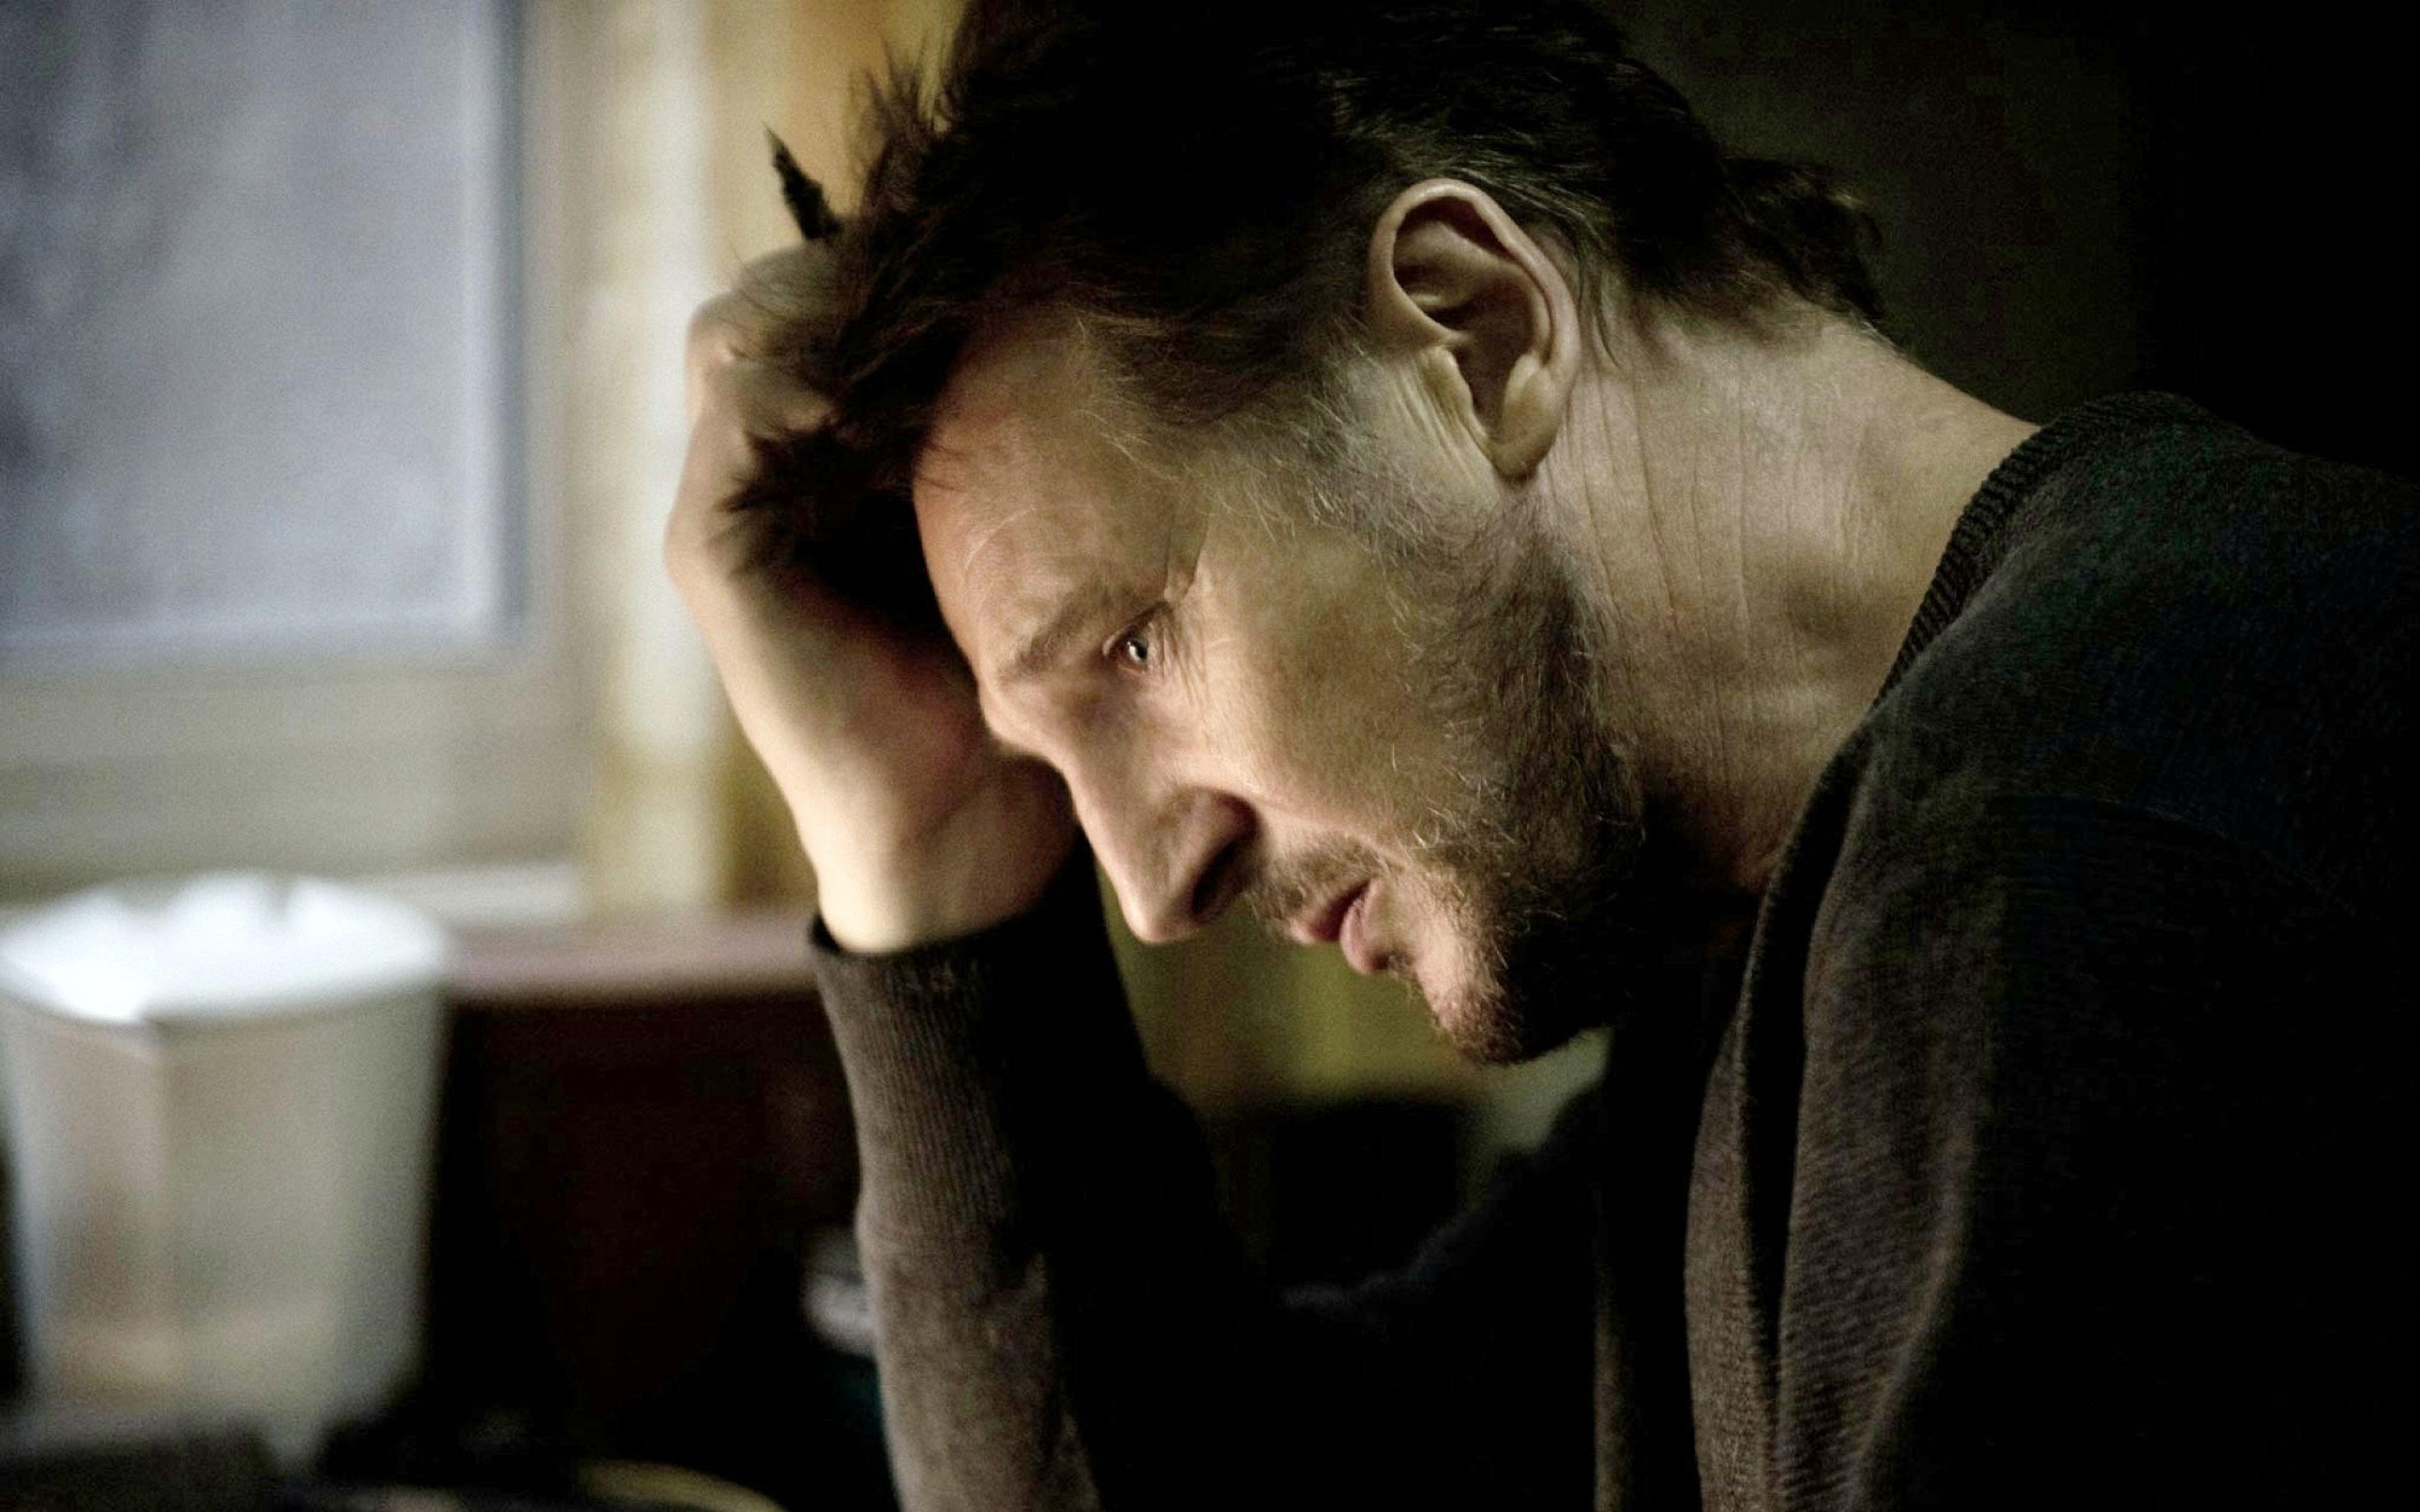 Download Wallpapers 3840x2400 Liam neeson, View, Brunette, Hair